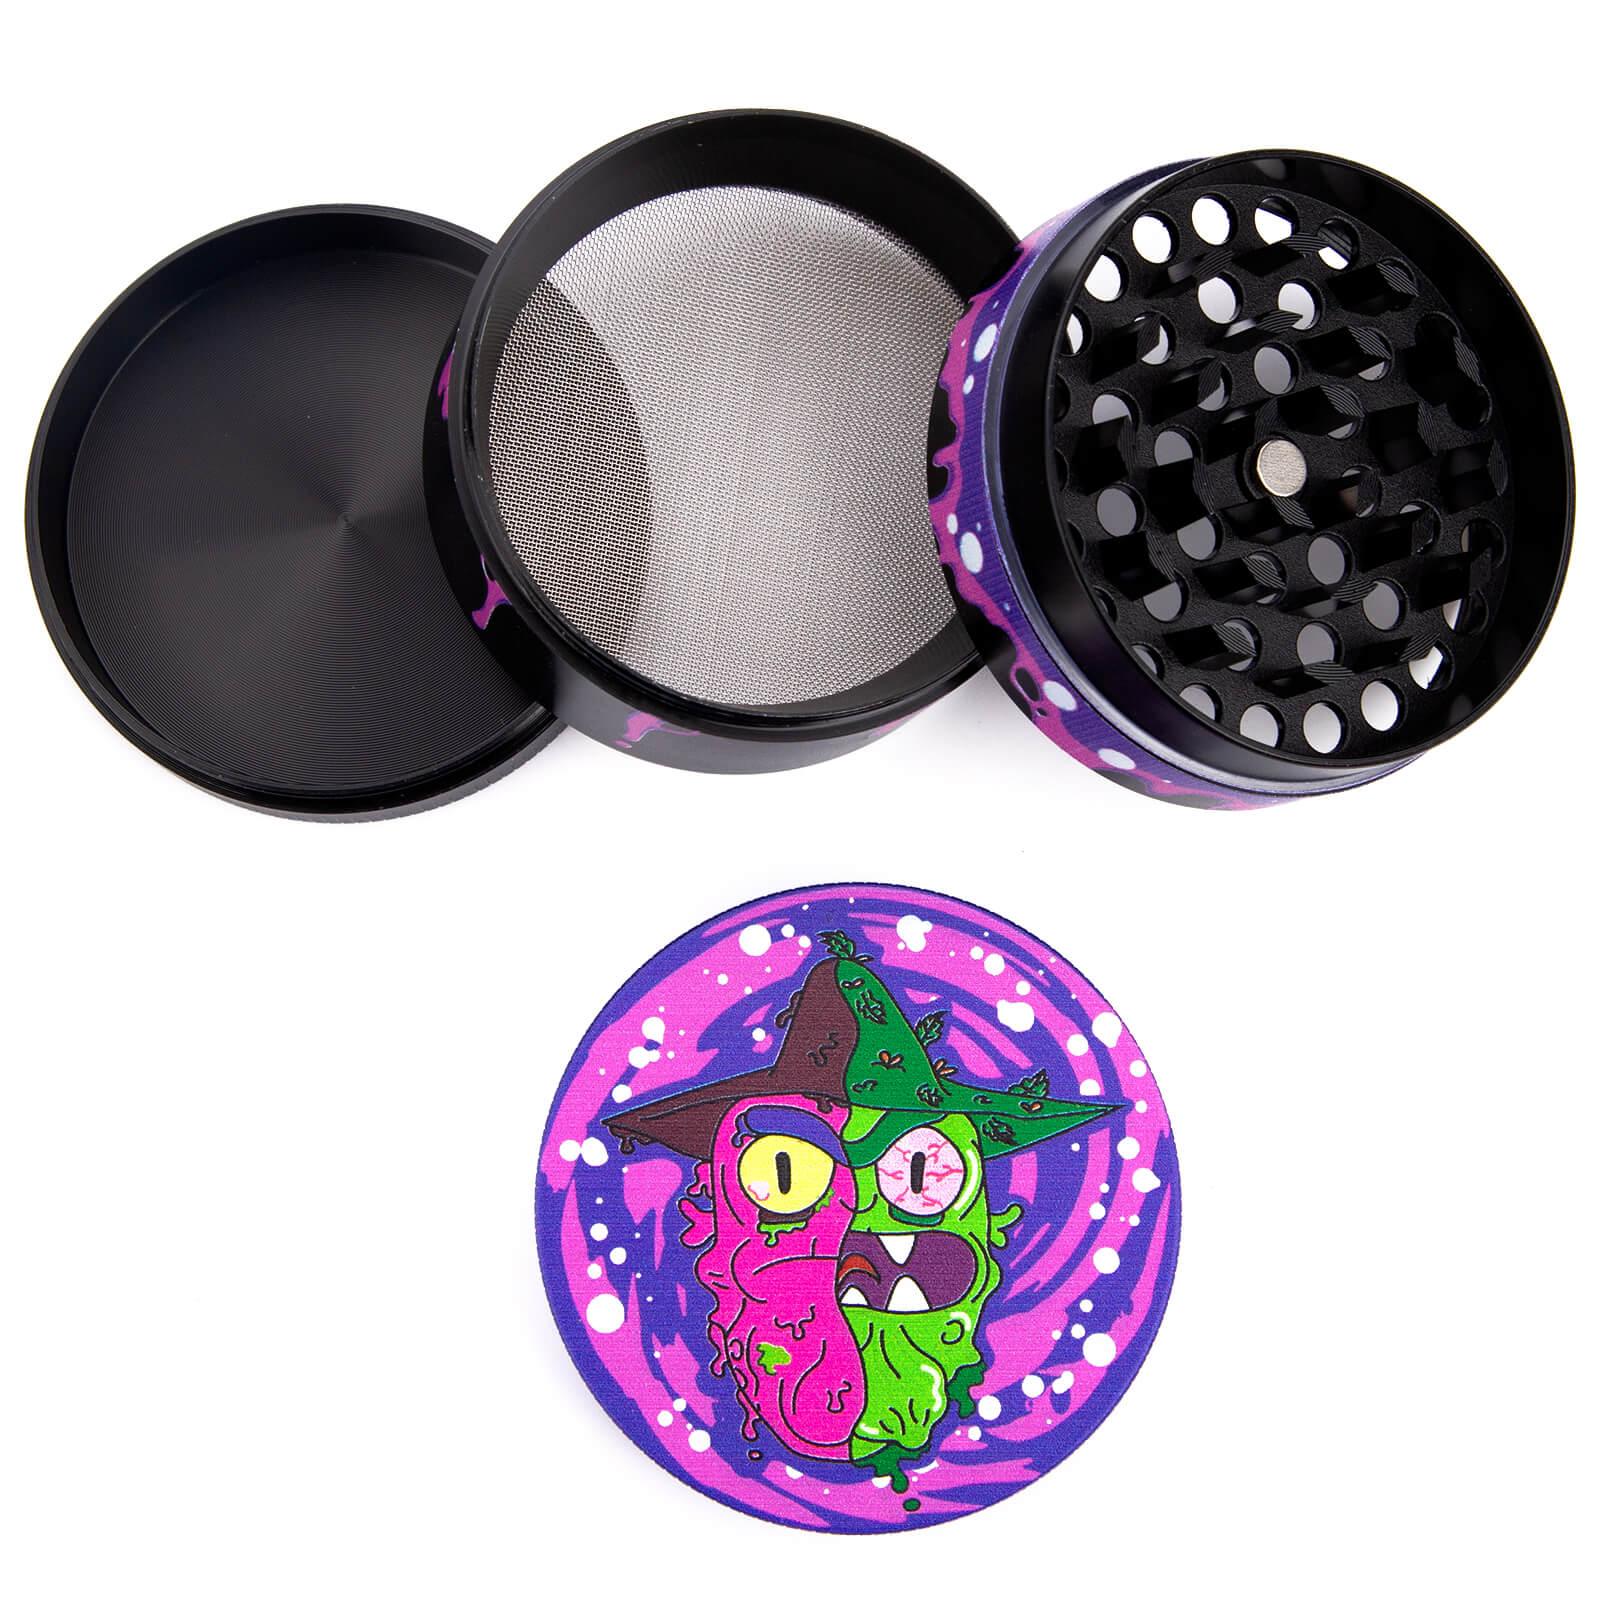 Scary Terry Metal Herb Grinder - PILOTDIARY